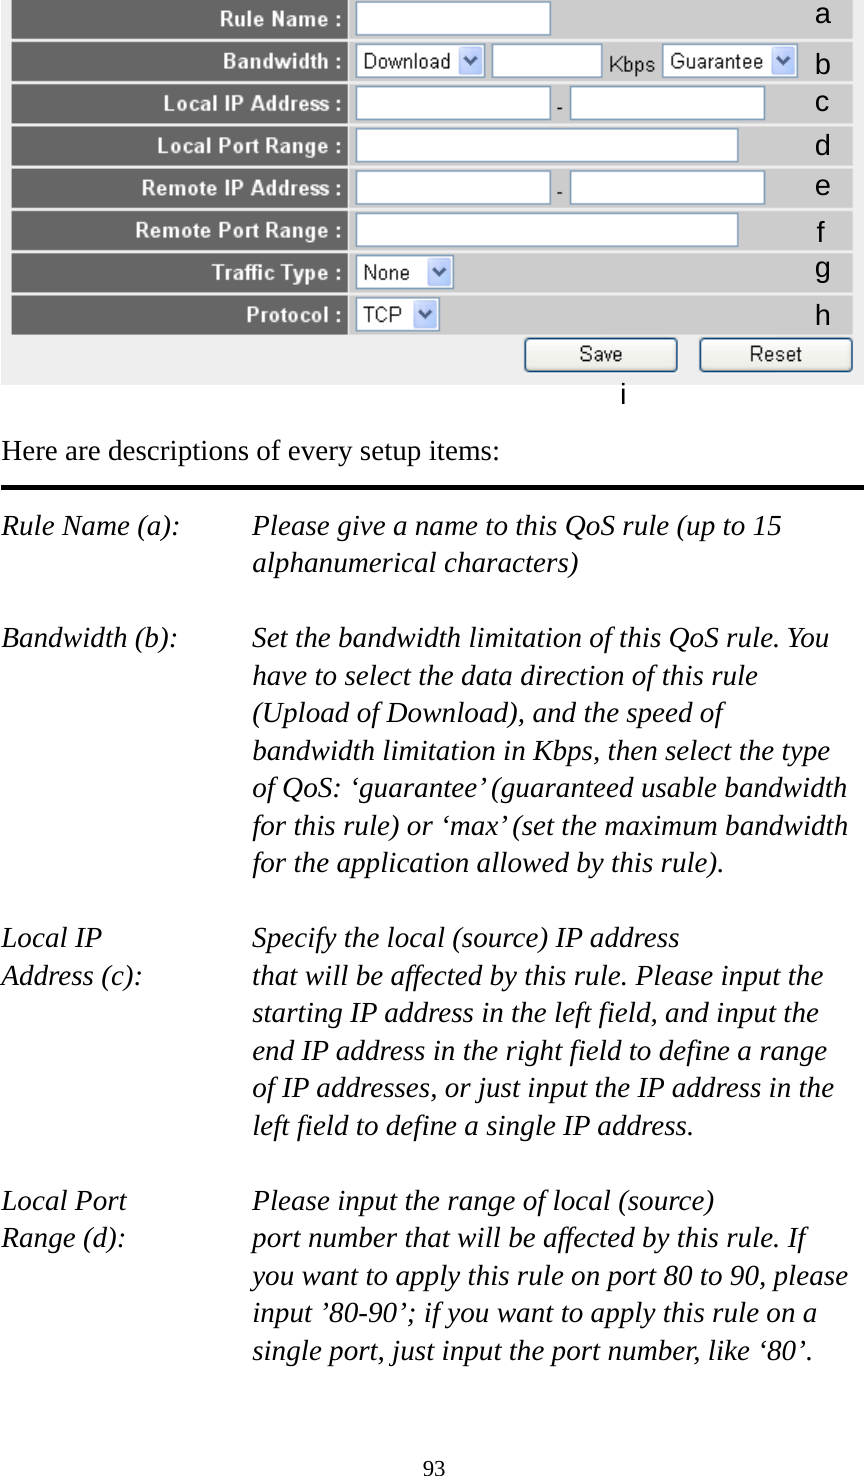 93   Here are descriptions of every setup items:  Rule Name (a):    Please give a name to this QoS rule (up to 15 alphanumerical characters)  Bandwidth (b):    Set the bandwidth limitation of this QoS rule. You have to select the data direction of this rule (Upload of Download), and the speed of bandwidth limitation in Kbps, then select the type of QoS: ‘guarantee’ (guaranteed usable bandwidth for this rule) or ‘max’ (set the maximum bandwidth for the application allowed by this rule).  Local IP        Specify the local (source) IP address Address (c):     that will be affected by this rule. Please input the starting IP address in the left field, and input the end IP address in the right field to define a range of IP addresses, or just input the IP address in the left field to define a single IP address.  Local Port       Please input the range of local (source) Range (d):    port number that will be affected by this rule. If you want to apply this rule on port 80 to 90, please input ’80-90’; if you want to apply this rule on a single port, just input the port number, like ‘80’.  a b c d e f g h i